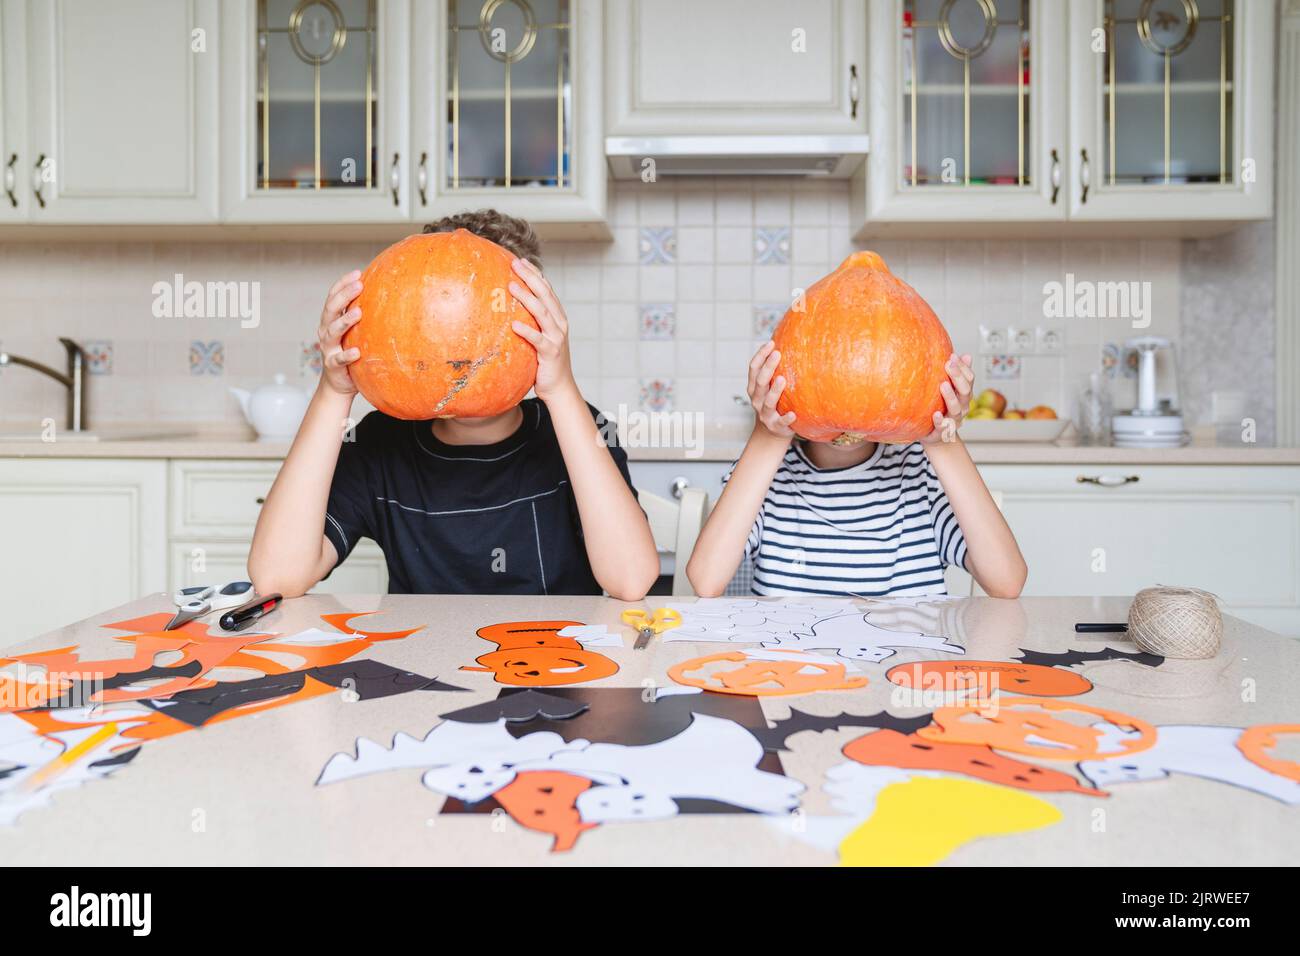 Children hold pumpkins and prepare for the Halloween holiday. Stock Photo